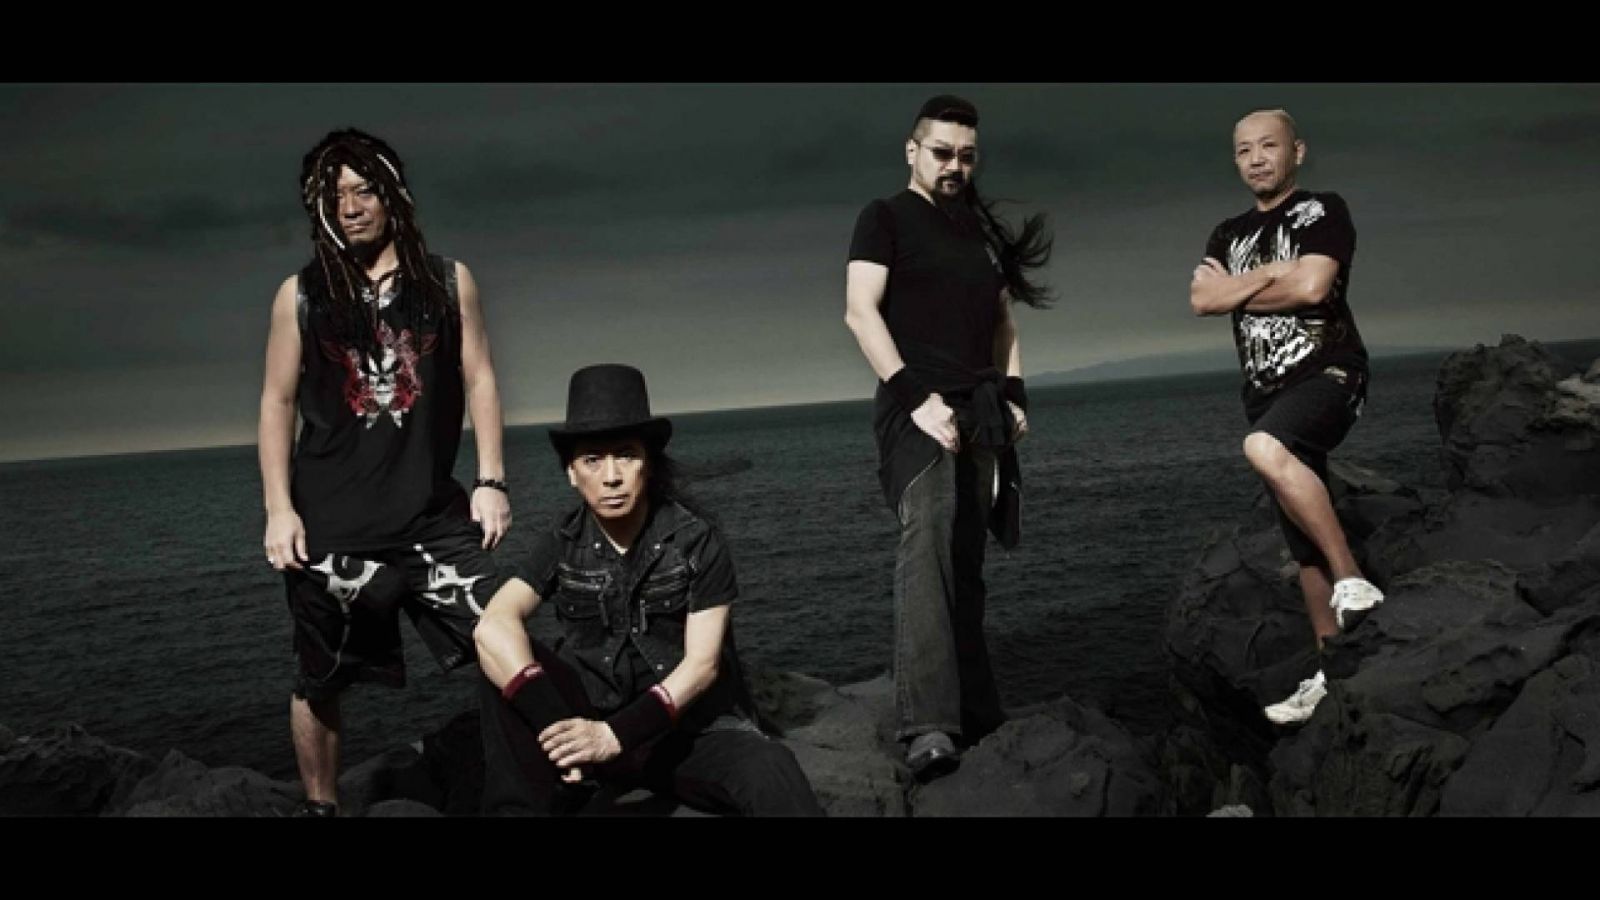 DVD ao vivo do LOUDNESS © LOUDNESS. All Rights Reserved